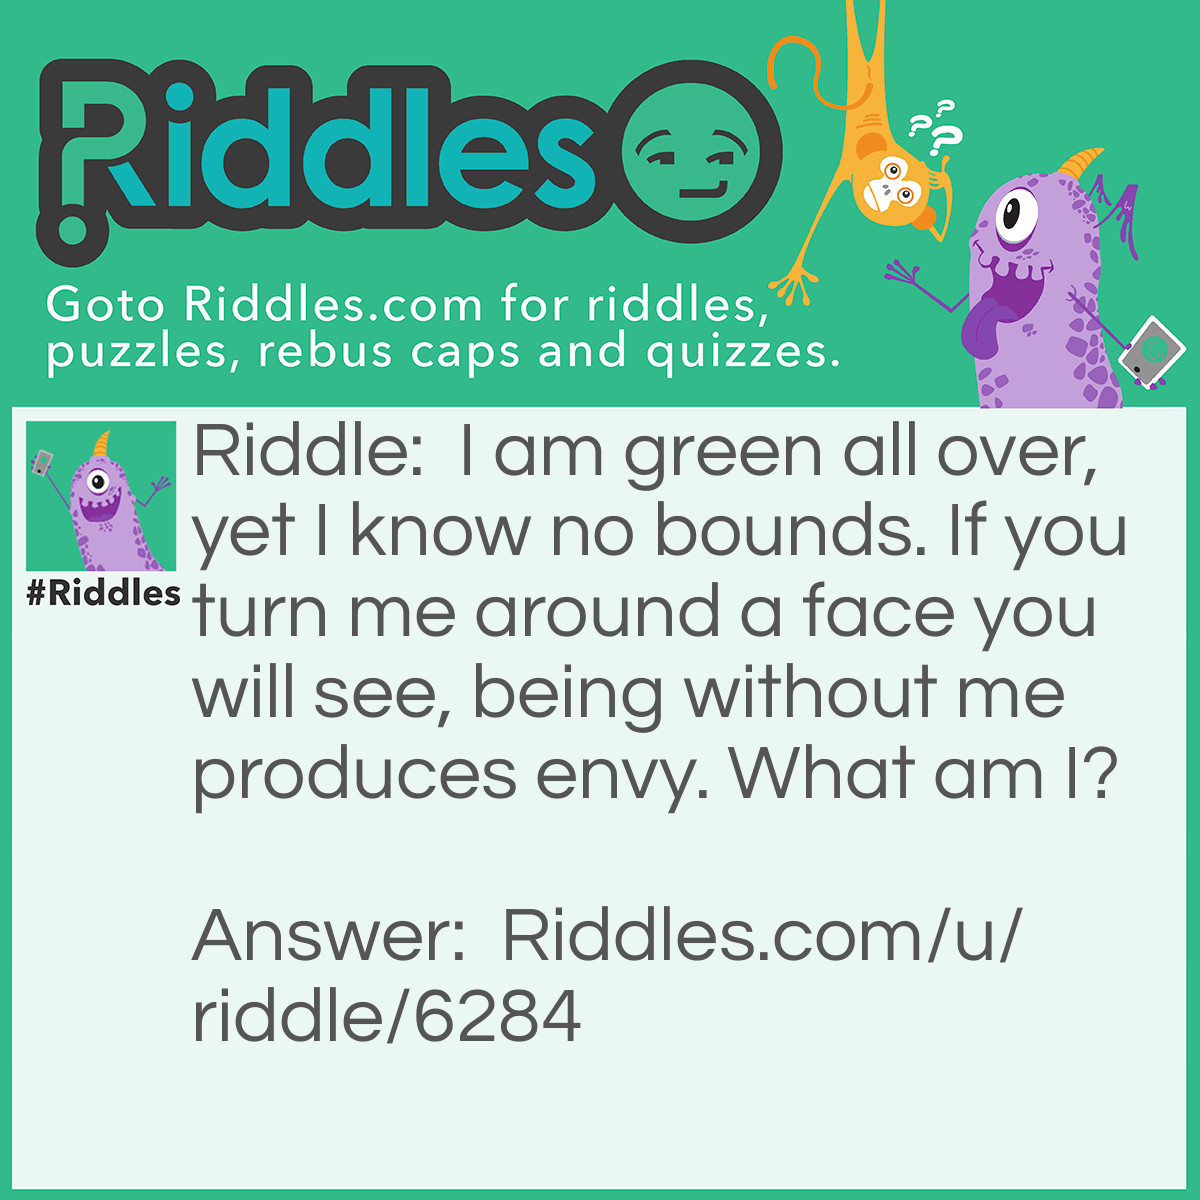 Riddle: I am green all over, yet I know no bounds. If you turn me around a face you will see, being without me produces envy. What am I? Answer: A dollar bill.